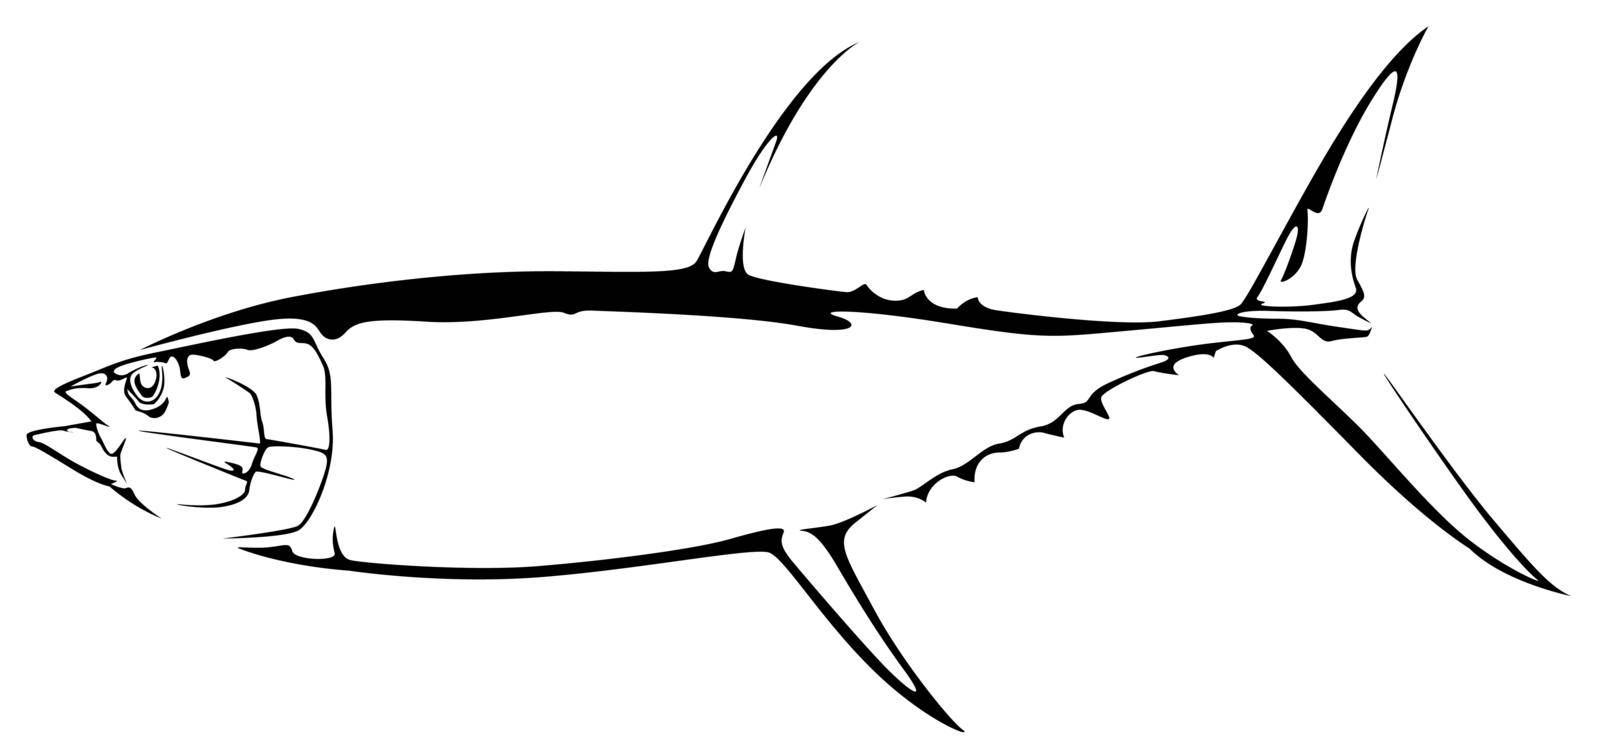 Drawing of Tuna Fish - Black and White Illustration or Logo Isolated on White Background, Vector